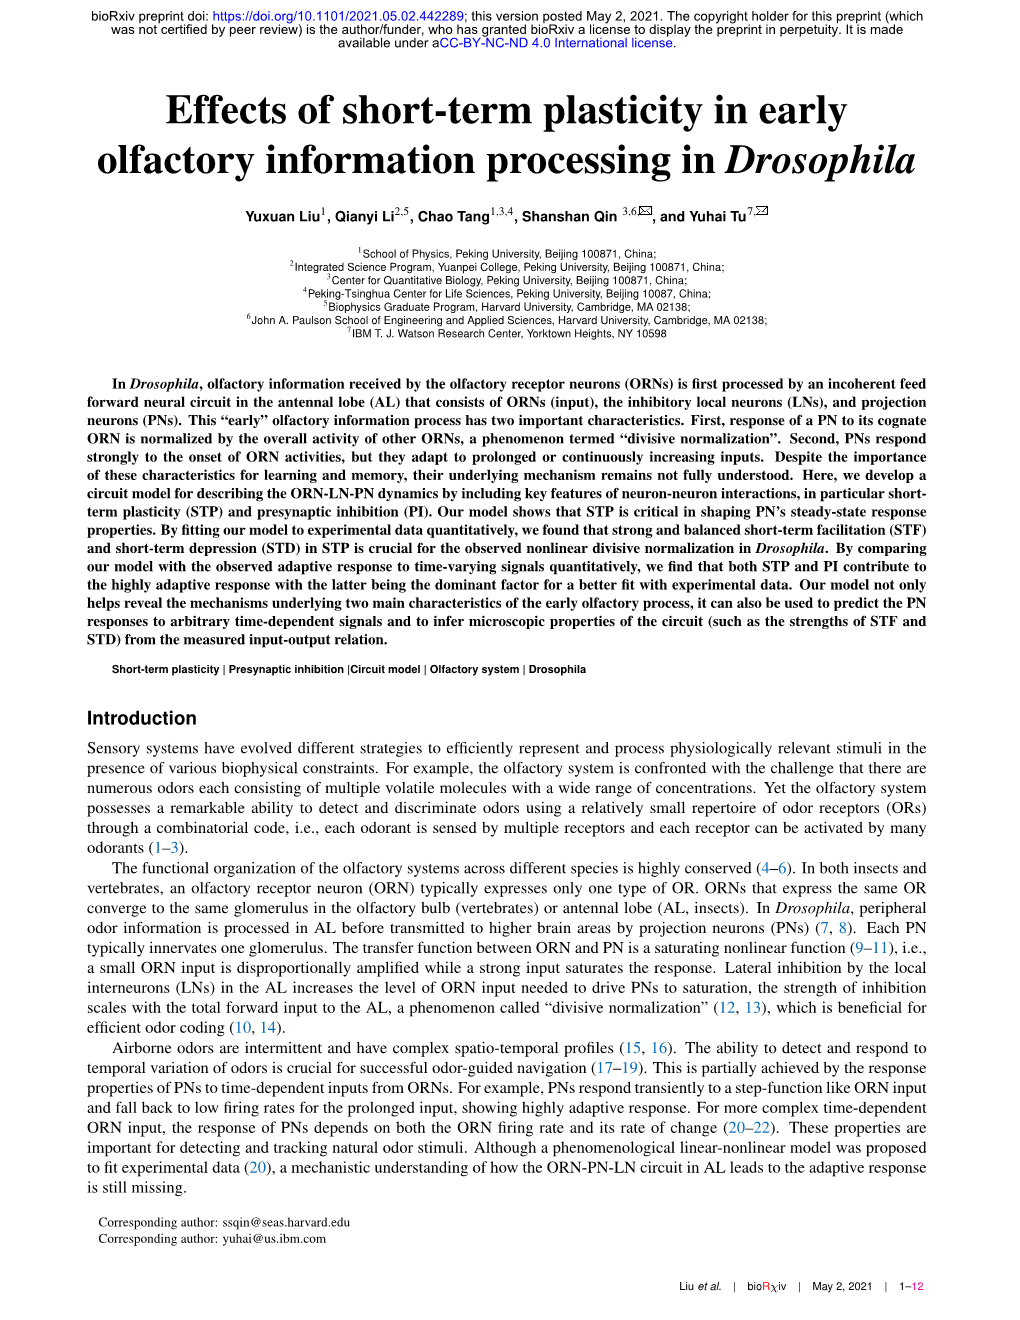 Effects of Short-Term Plasticity in Early Olfactory Information Processing in Drosophila